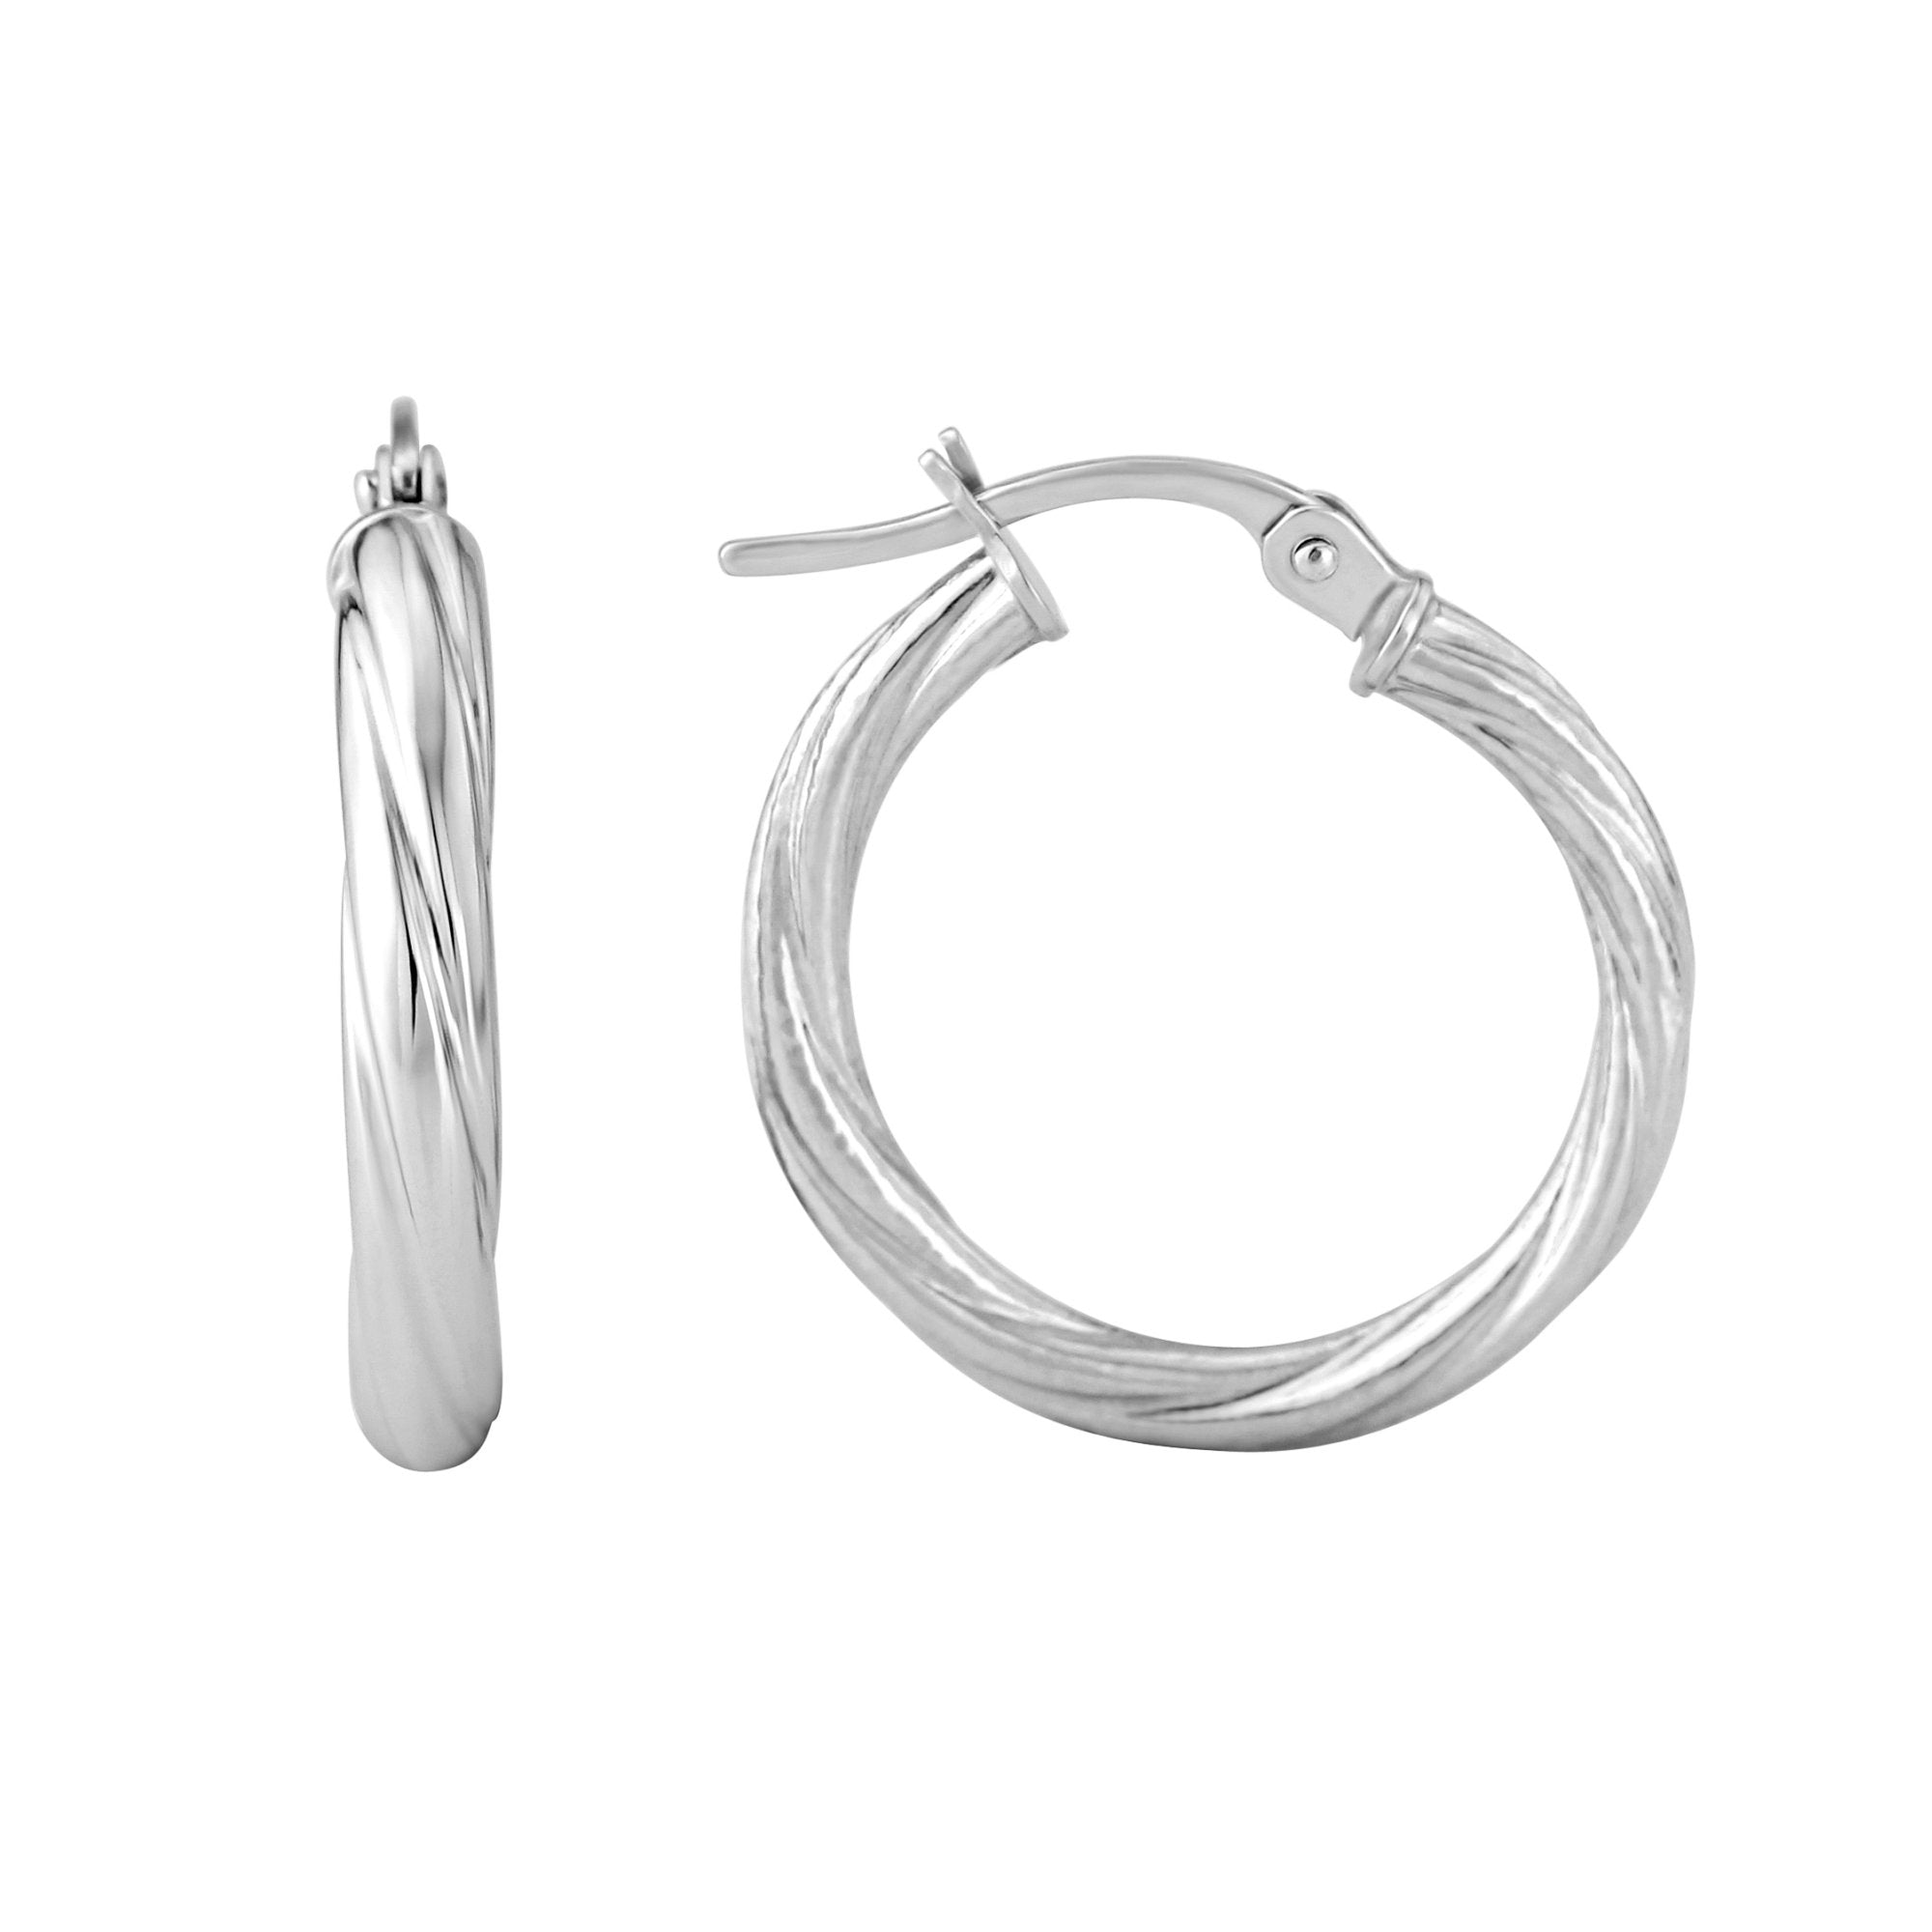 9ct white gold 15mm twisted hoop earrings